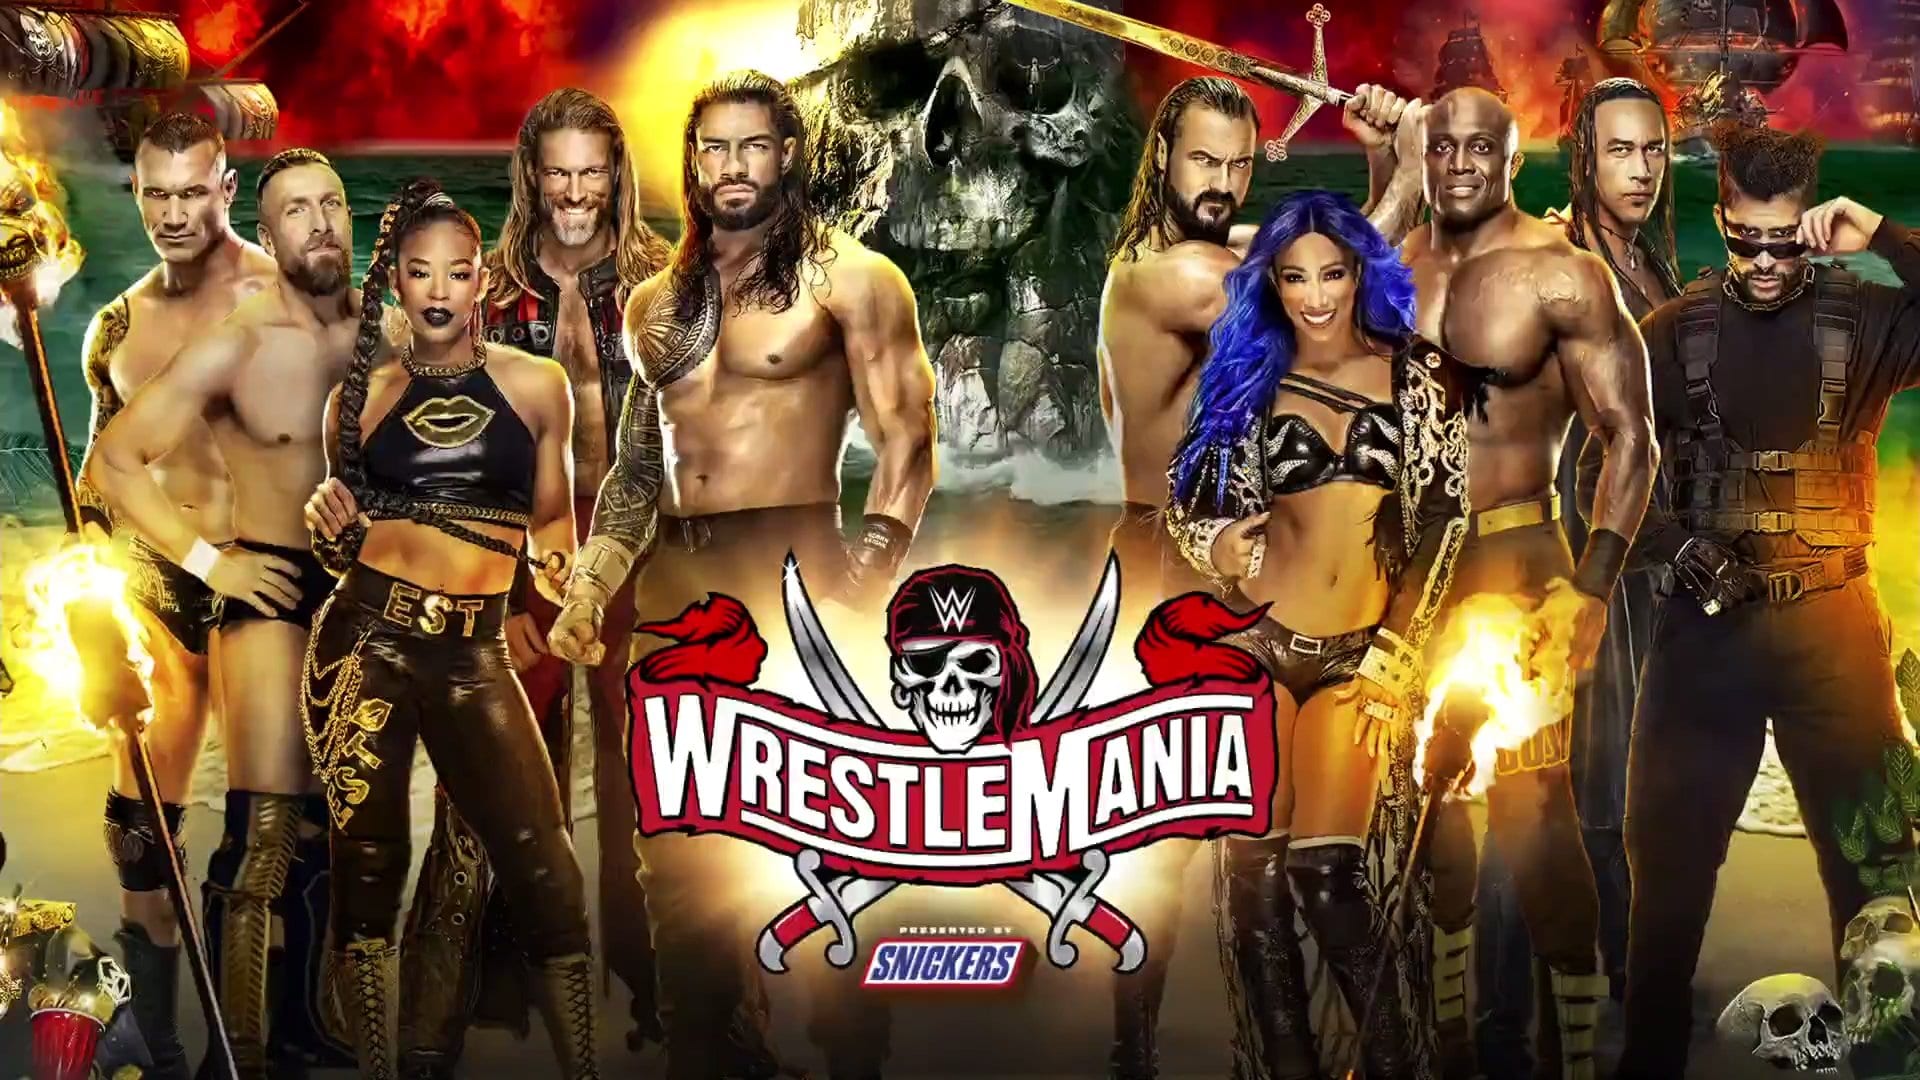 How to watch WWE WrestleMania 37: live stream wrestling from anywhere |  GamesRadar+